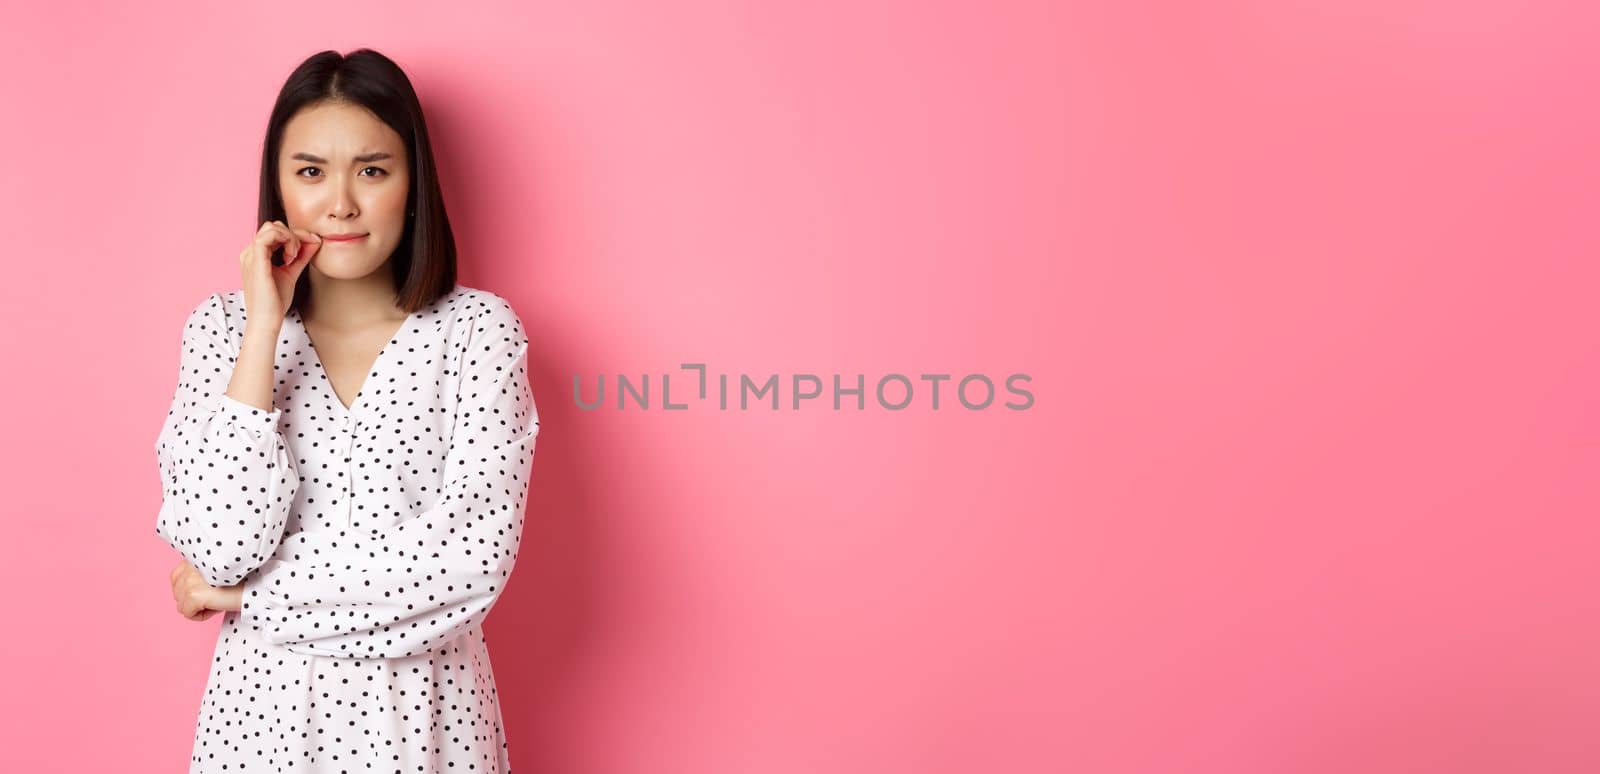 Brunette asian woman in dress looking displeased, frowning and zipping mouth, seal lips with promise, standing over pink background.